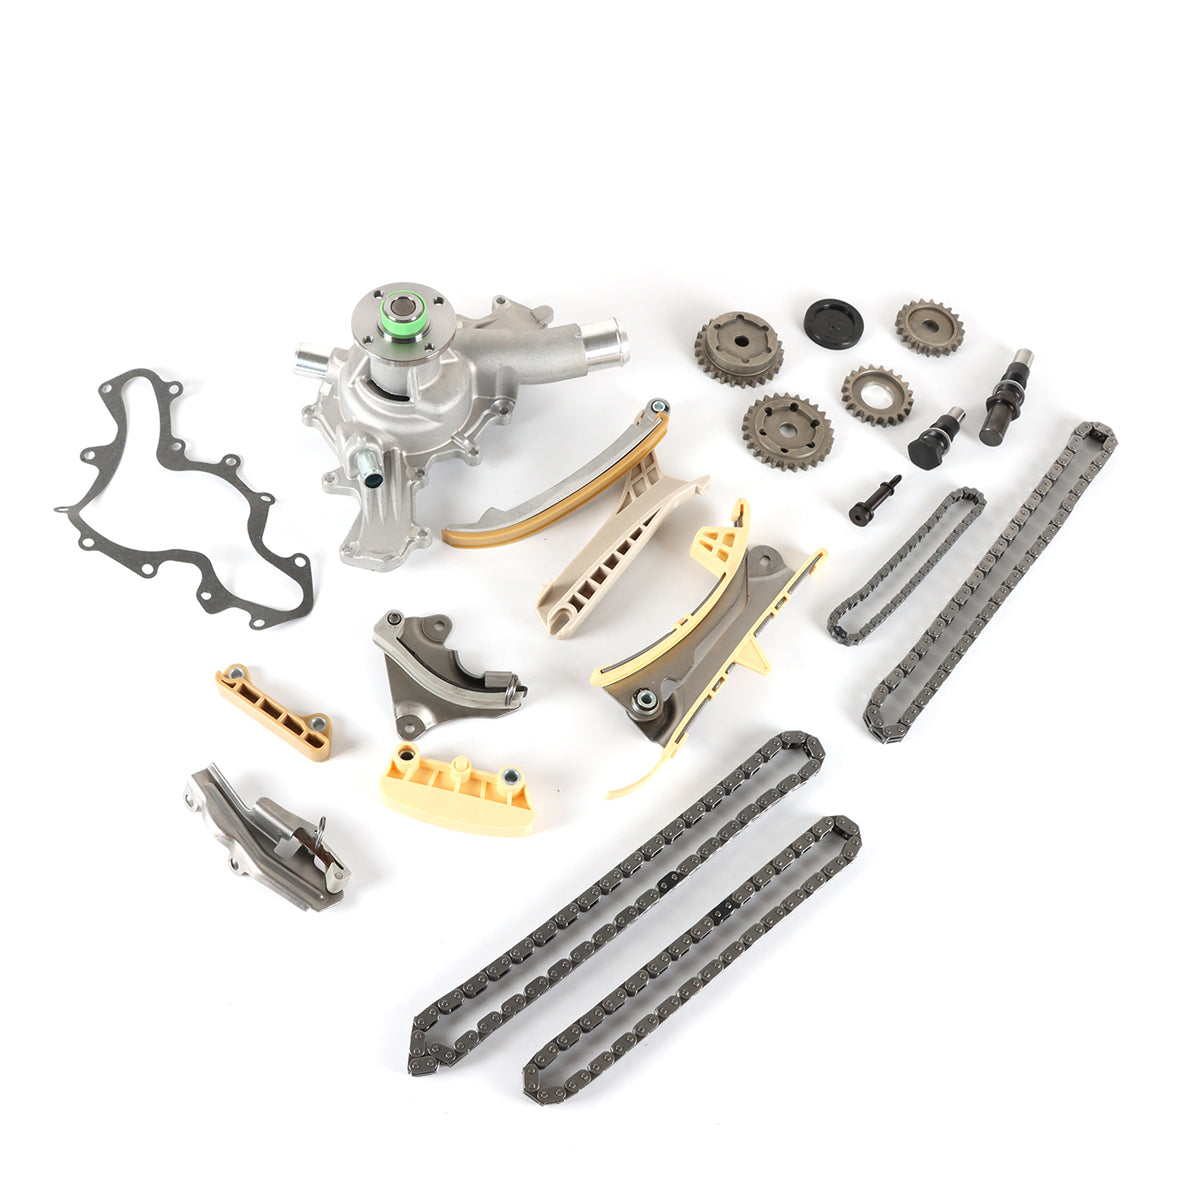 Daysyore Timing Chain Kit,Timing Chain Kit  for 1997 to 2009, Timing Chain Kit Ford Explorer/Mustang/Ranger, Auto Timing Chain Kit 